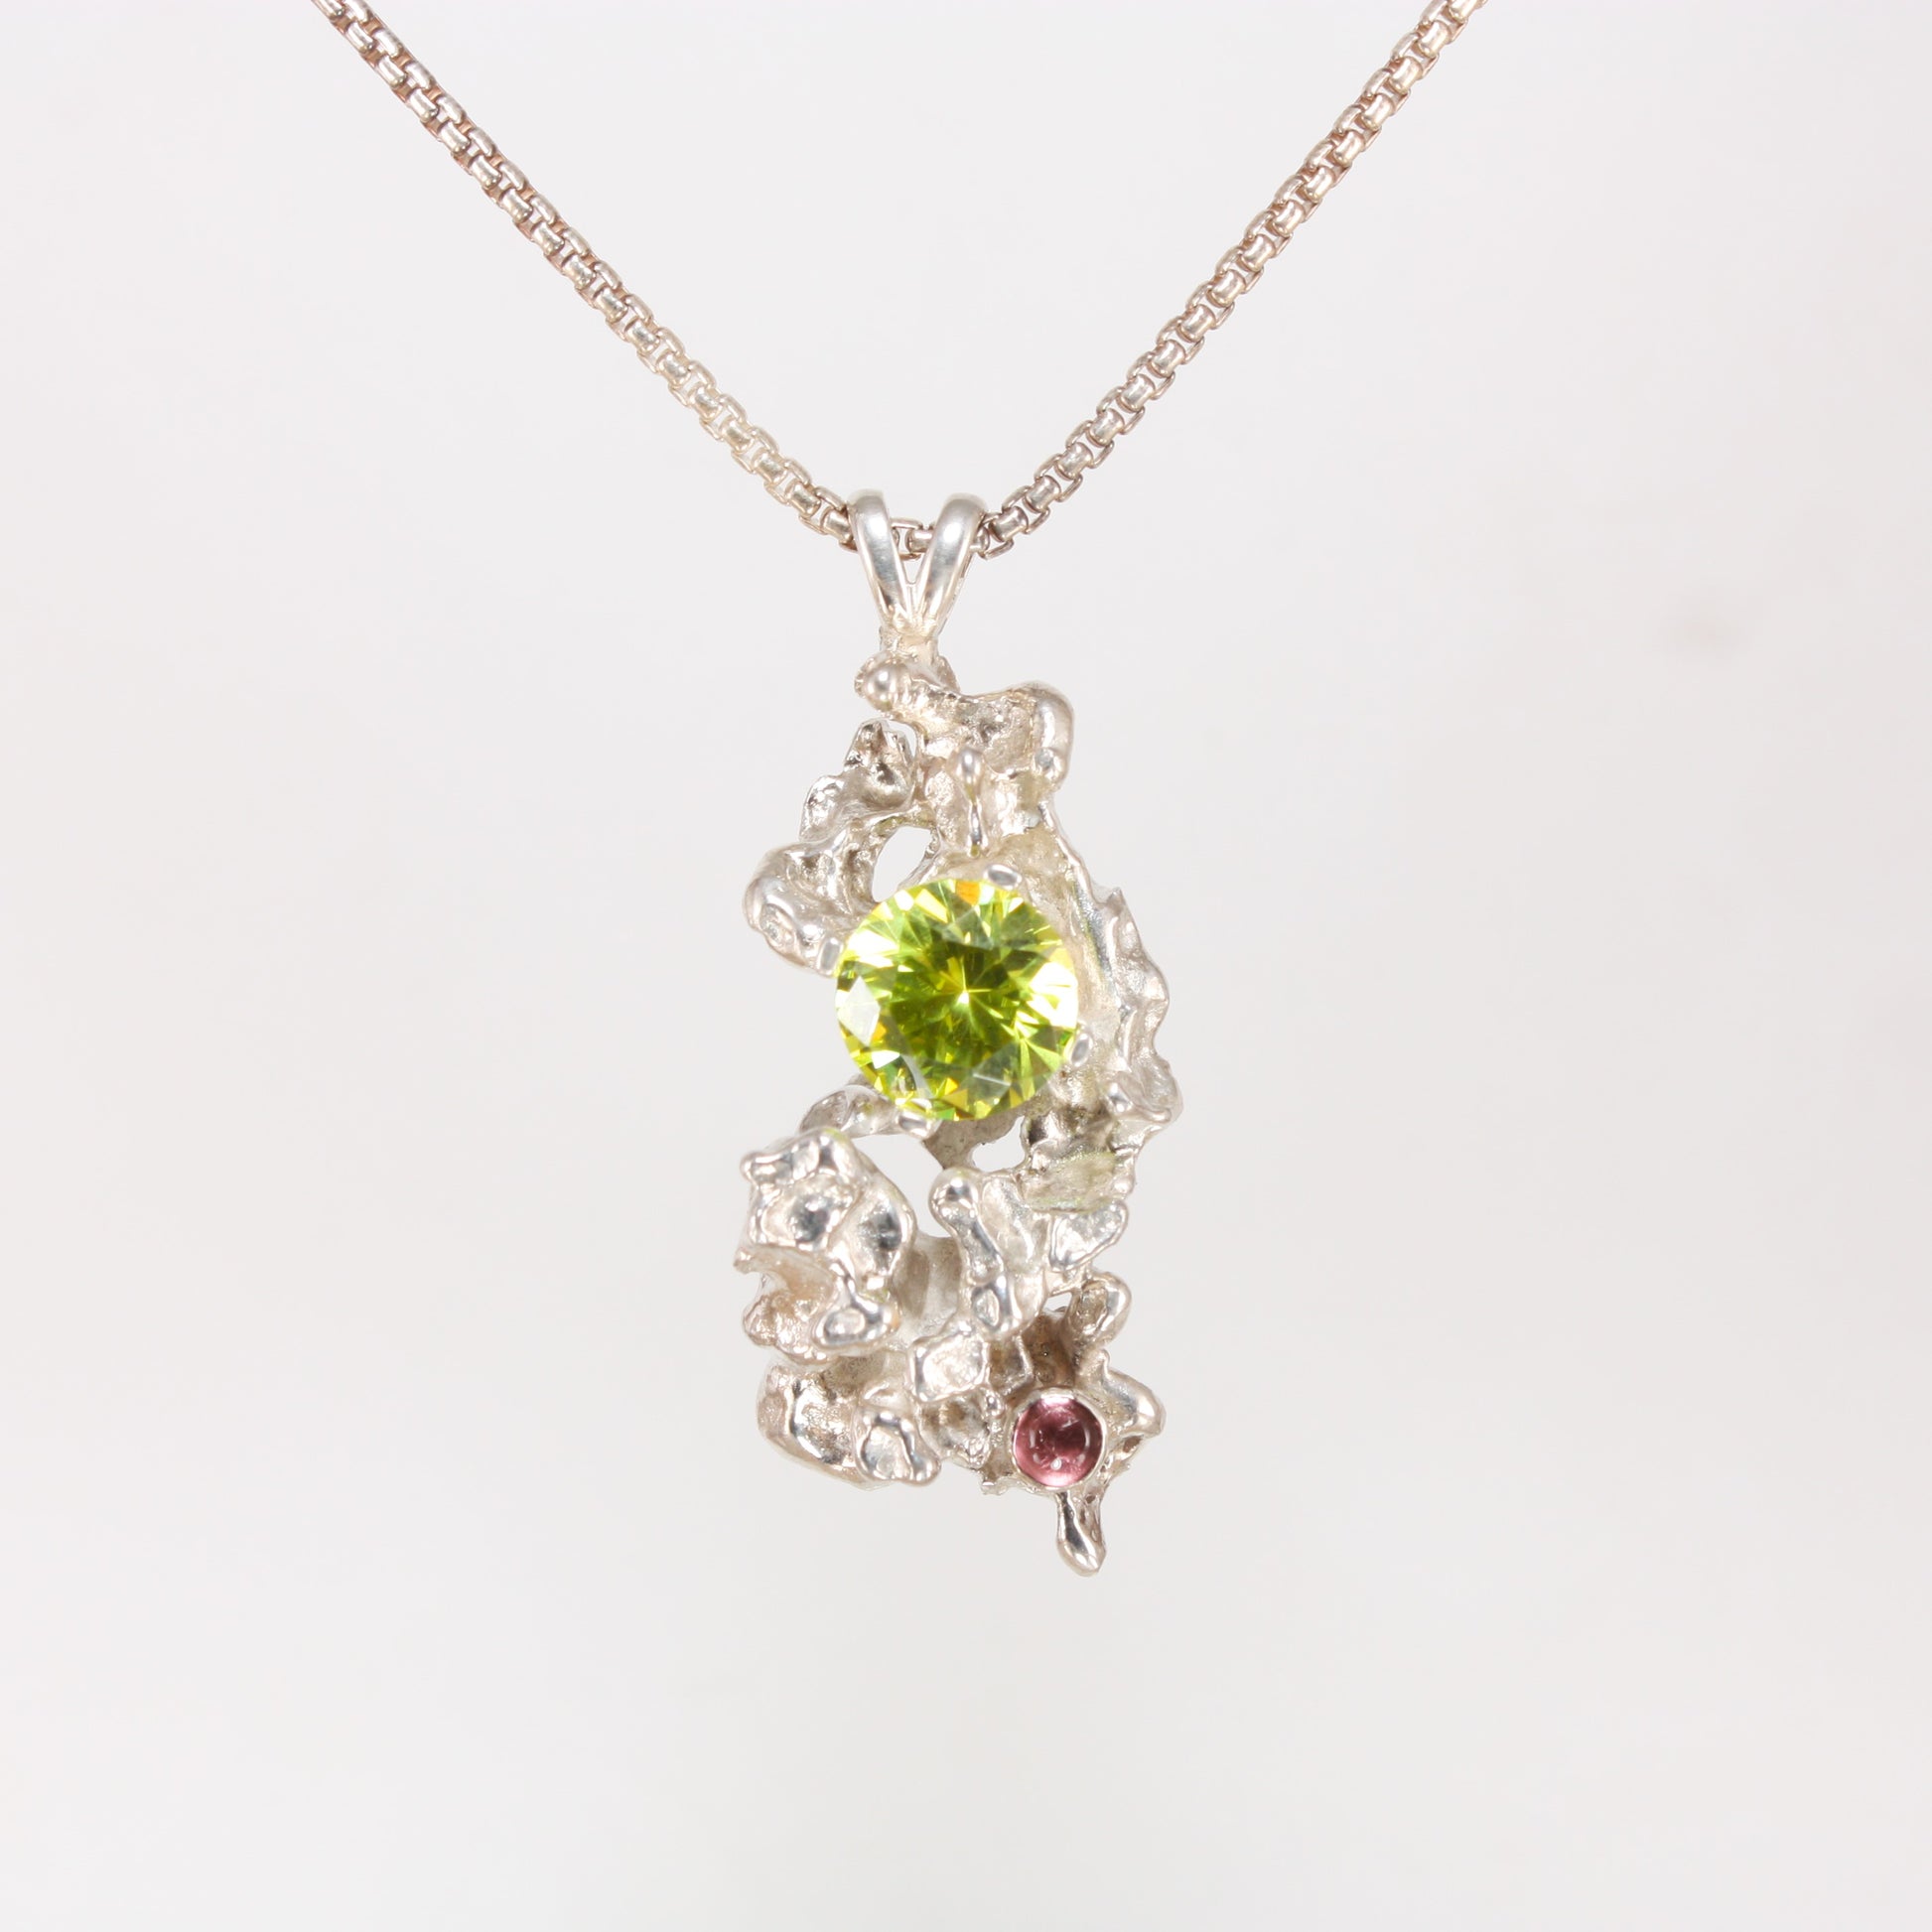 Salt Cast Silver Pendant with Peridot and Pink Tourmaline